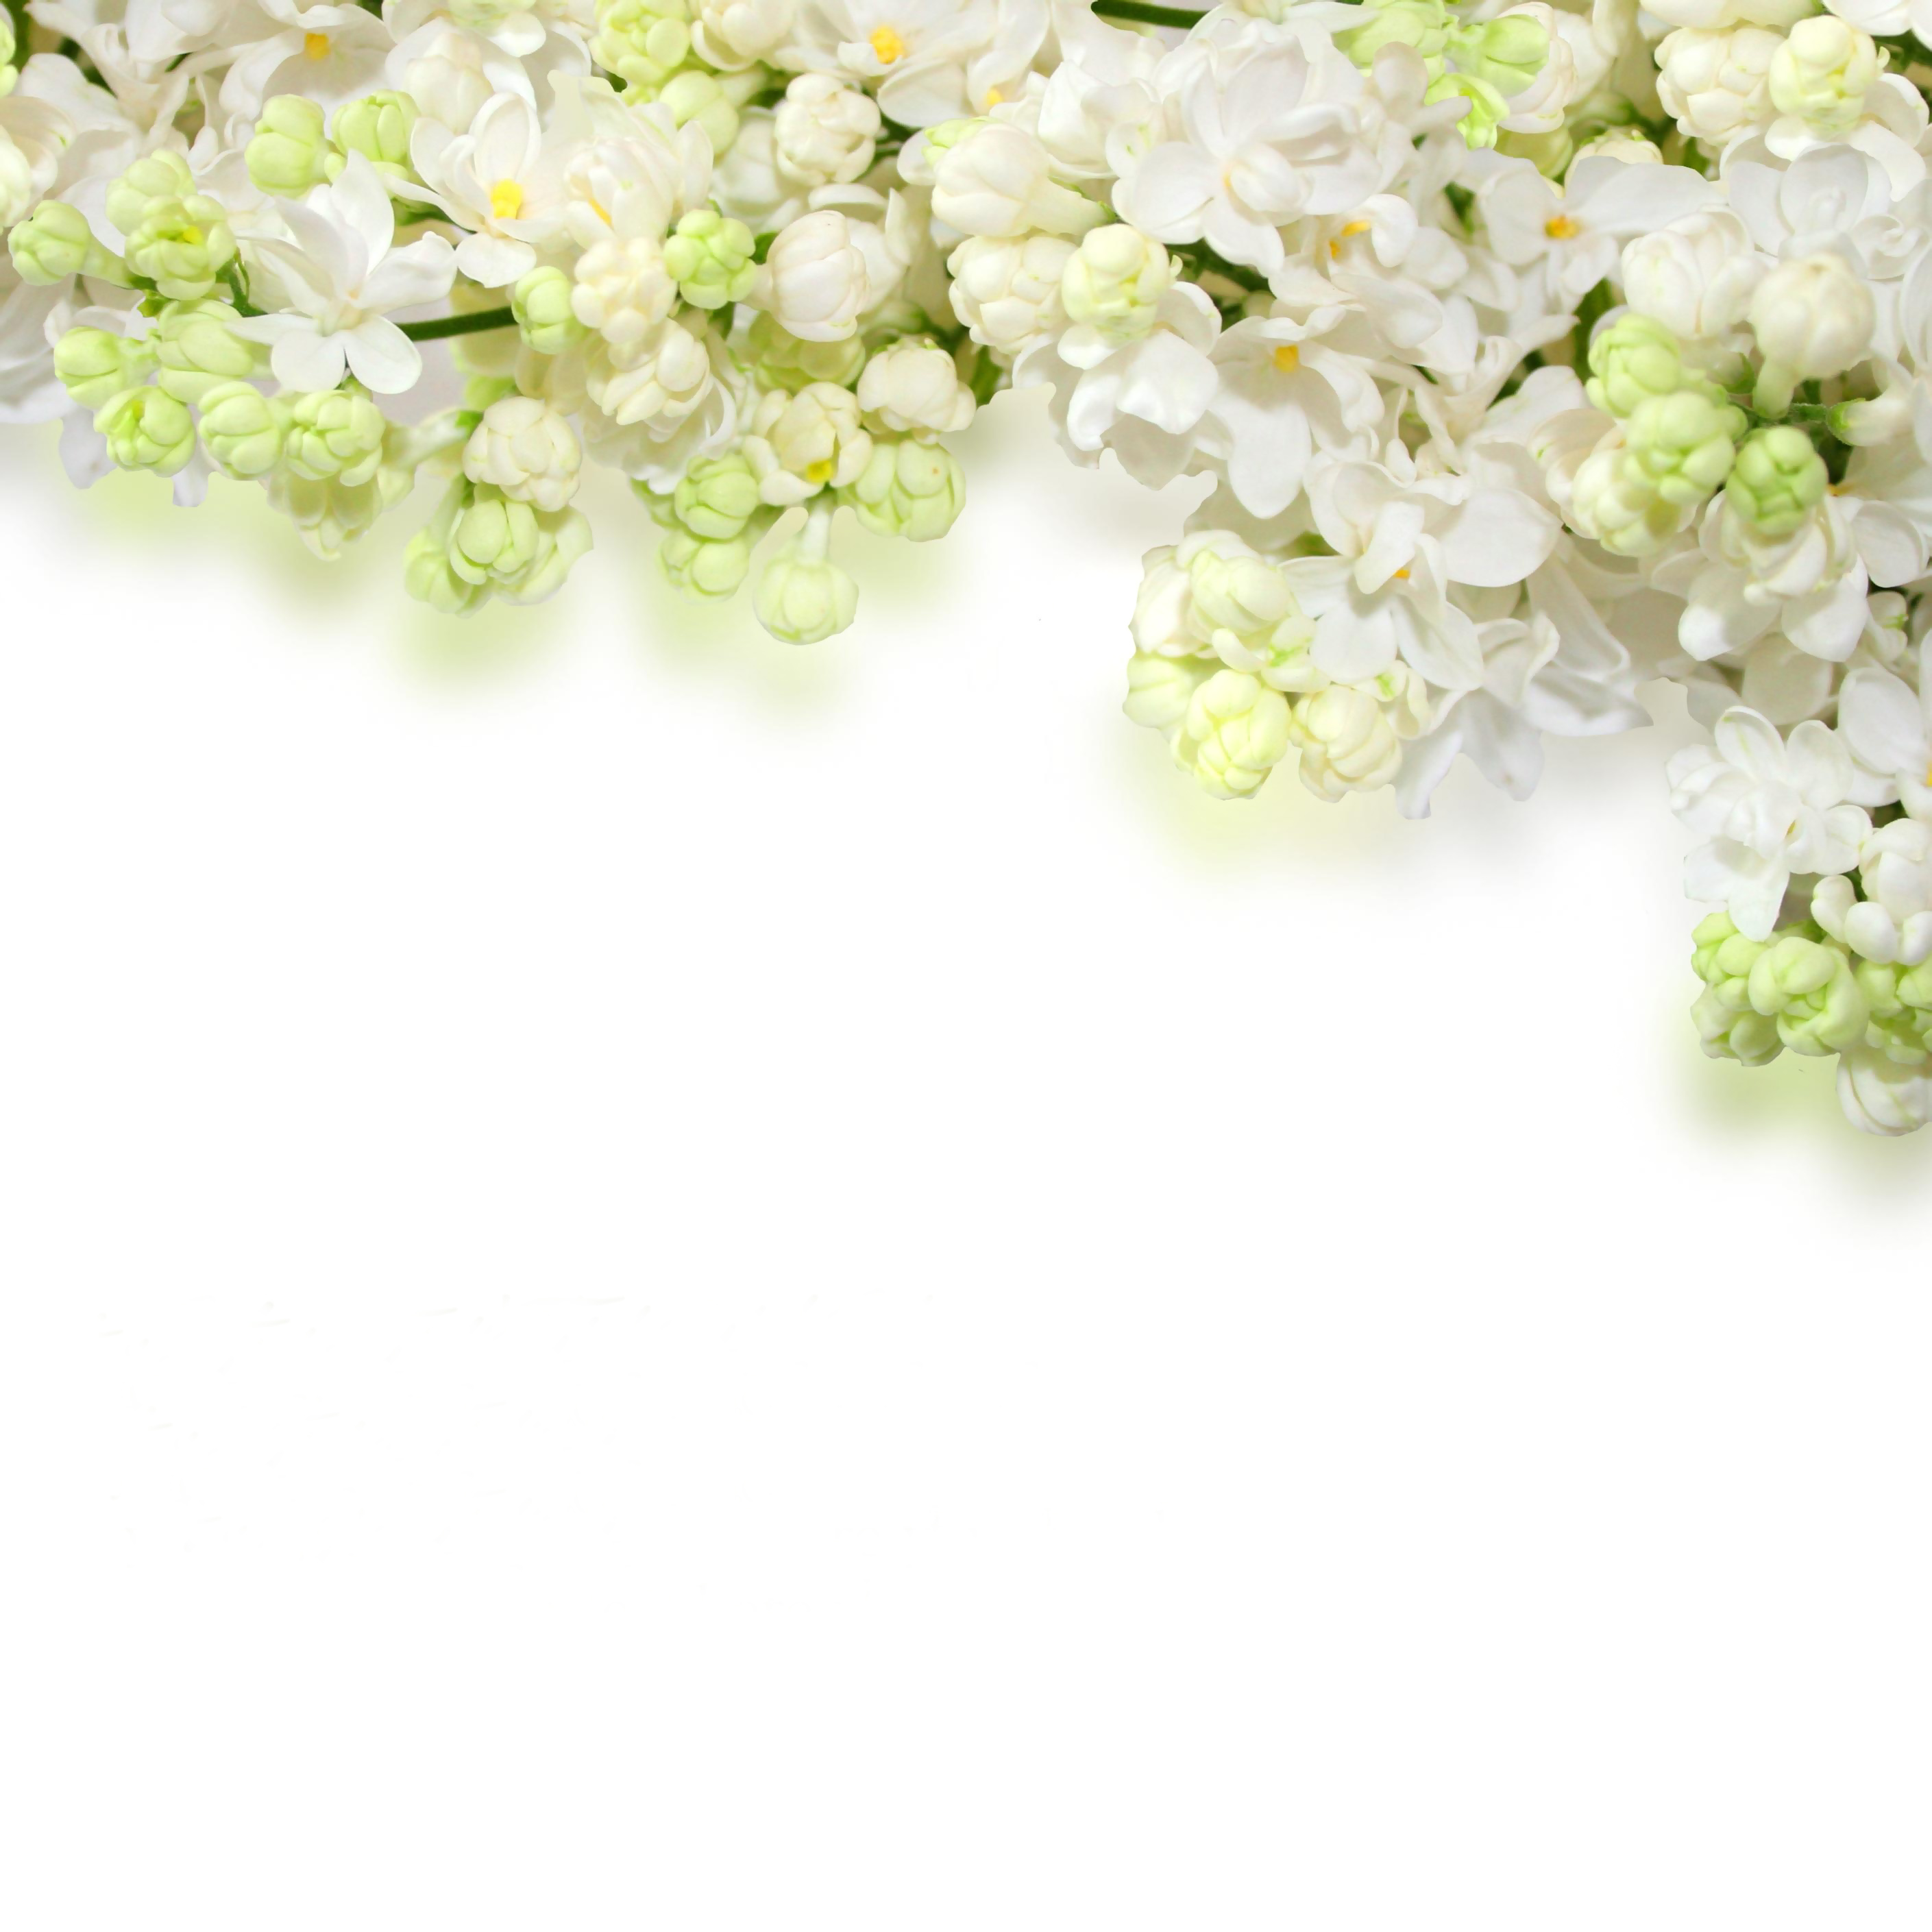 Delicate White Flowers Background | Gallery Yopriceville - High ...